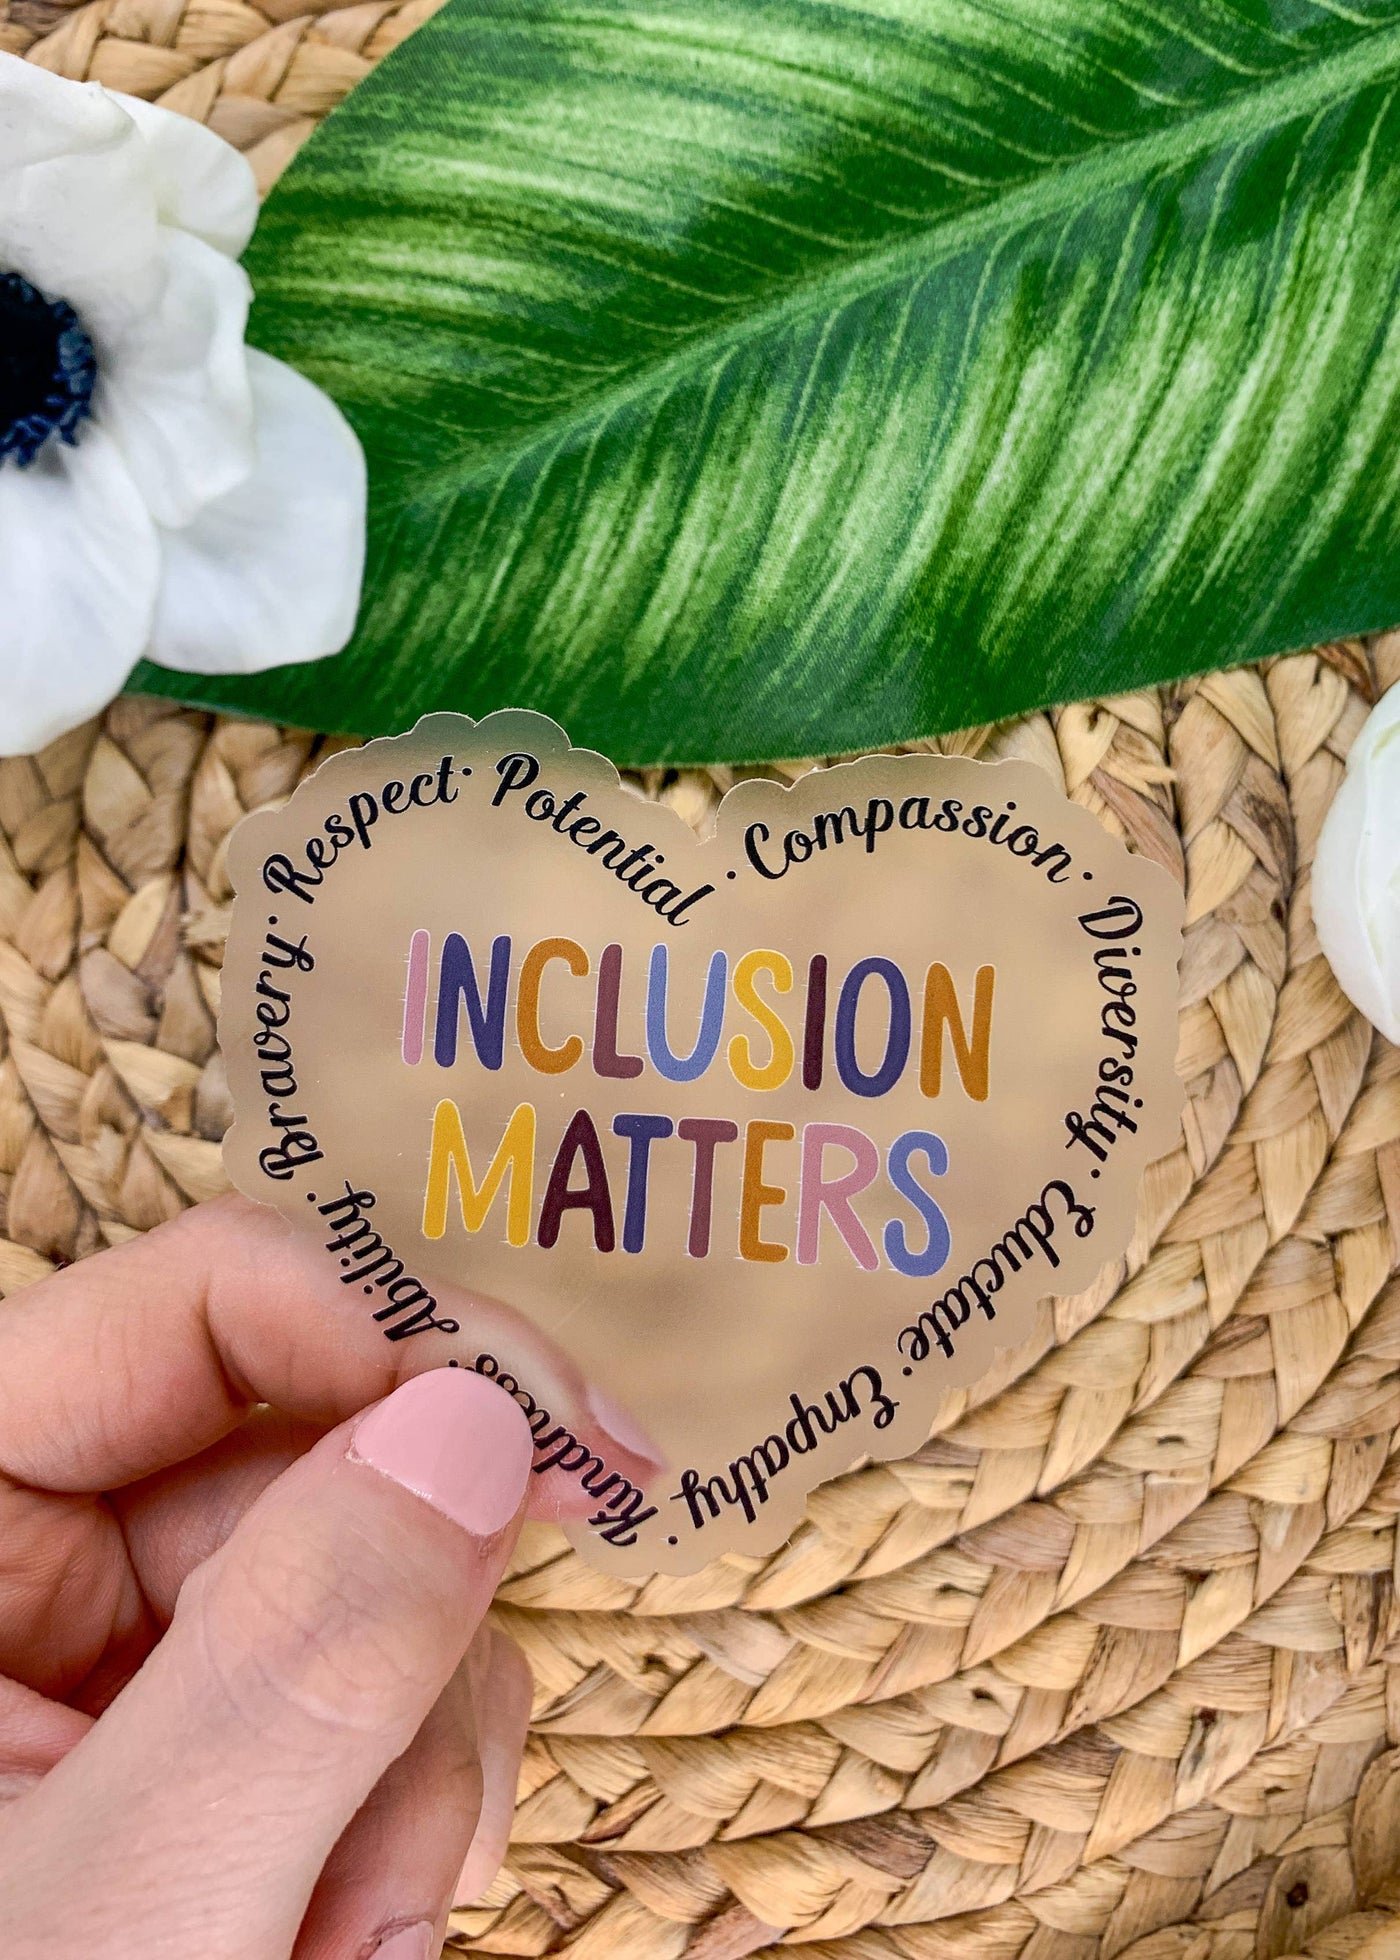 Savannah and James Co - Inclusion Matters, Clear Vinyl, Sticker, 3x3 inch - Two Little Birds Boutique